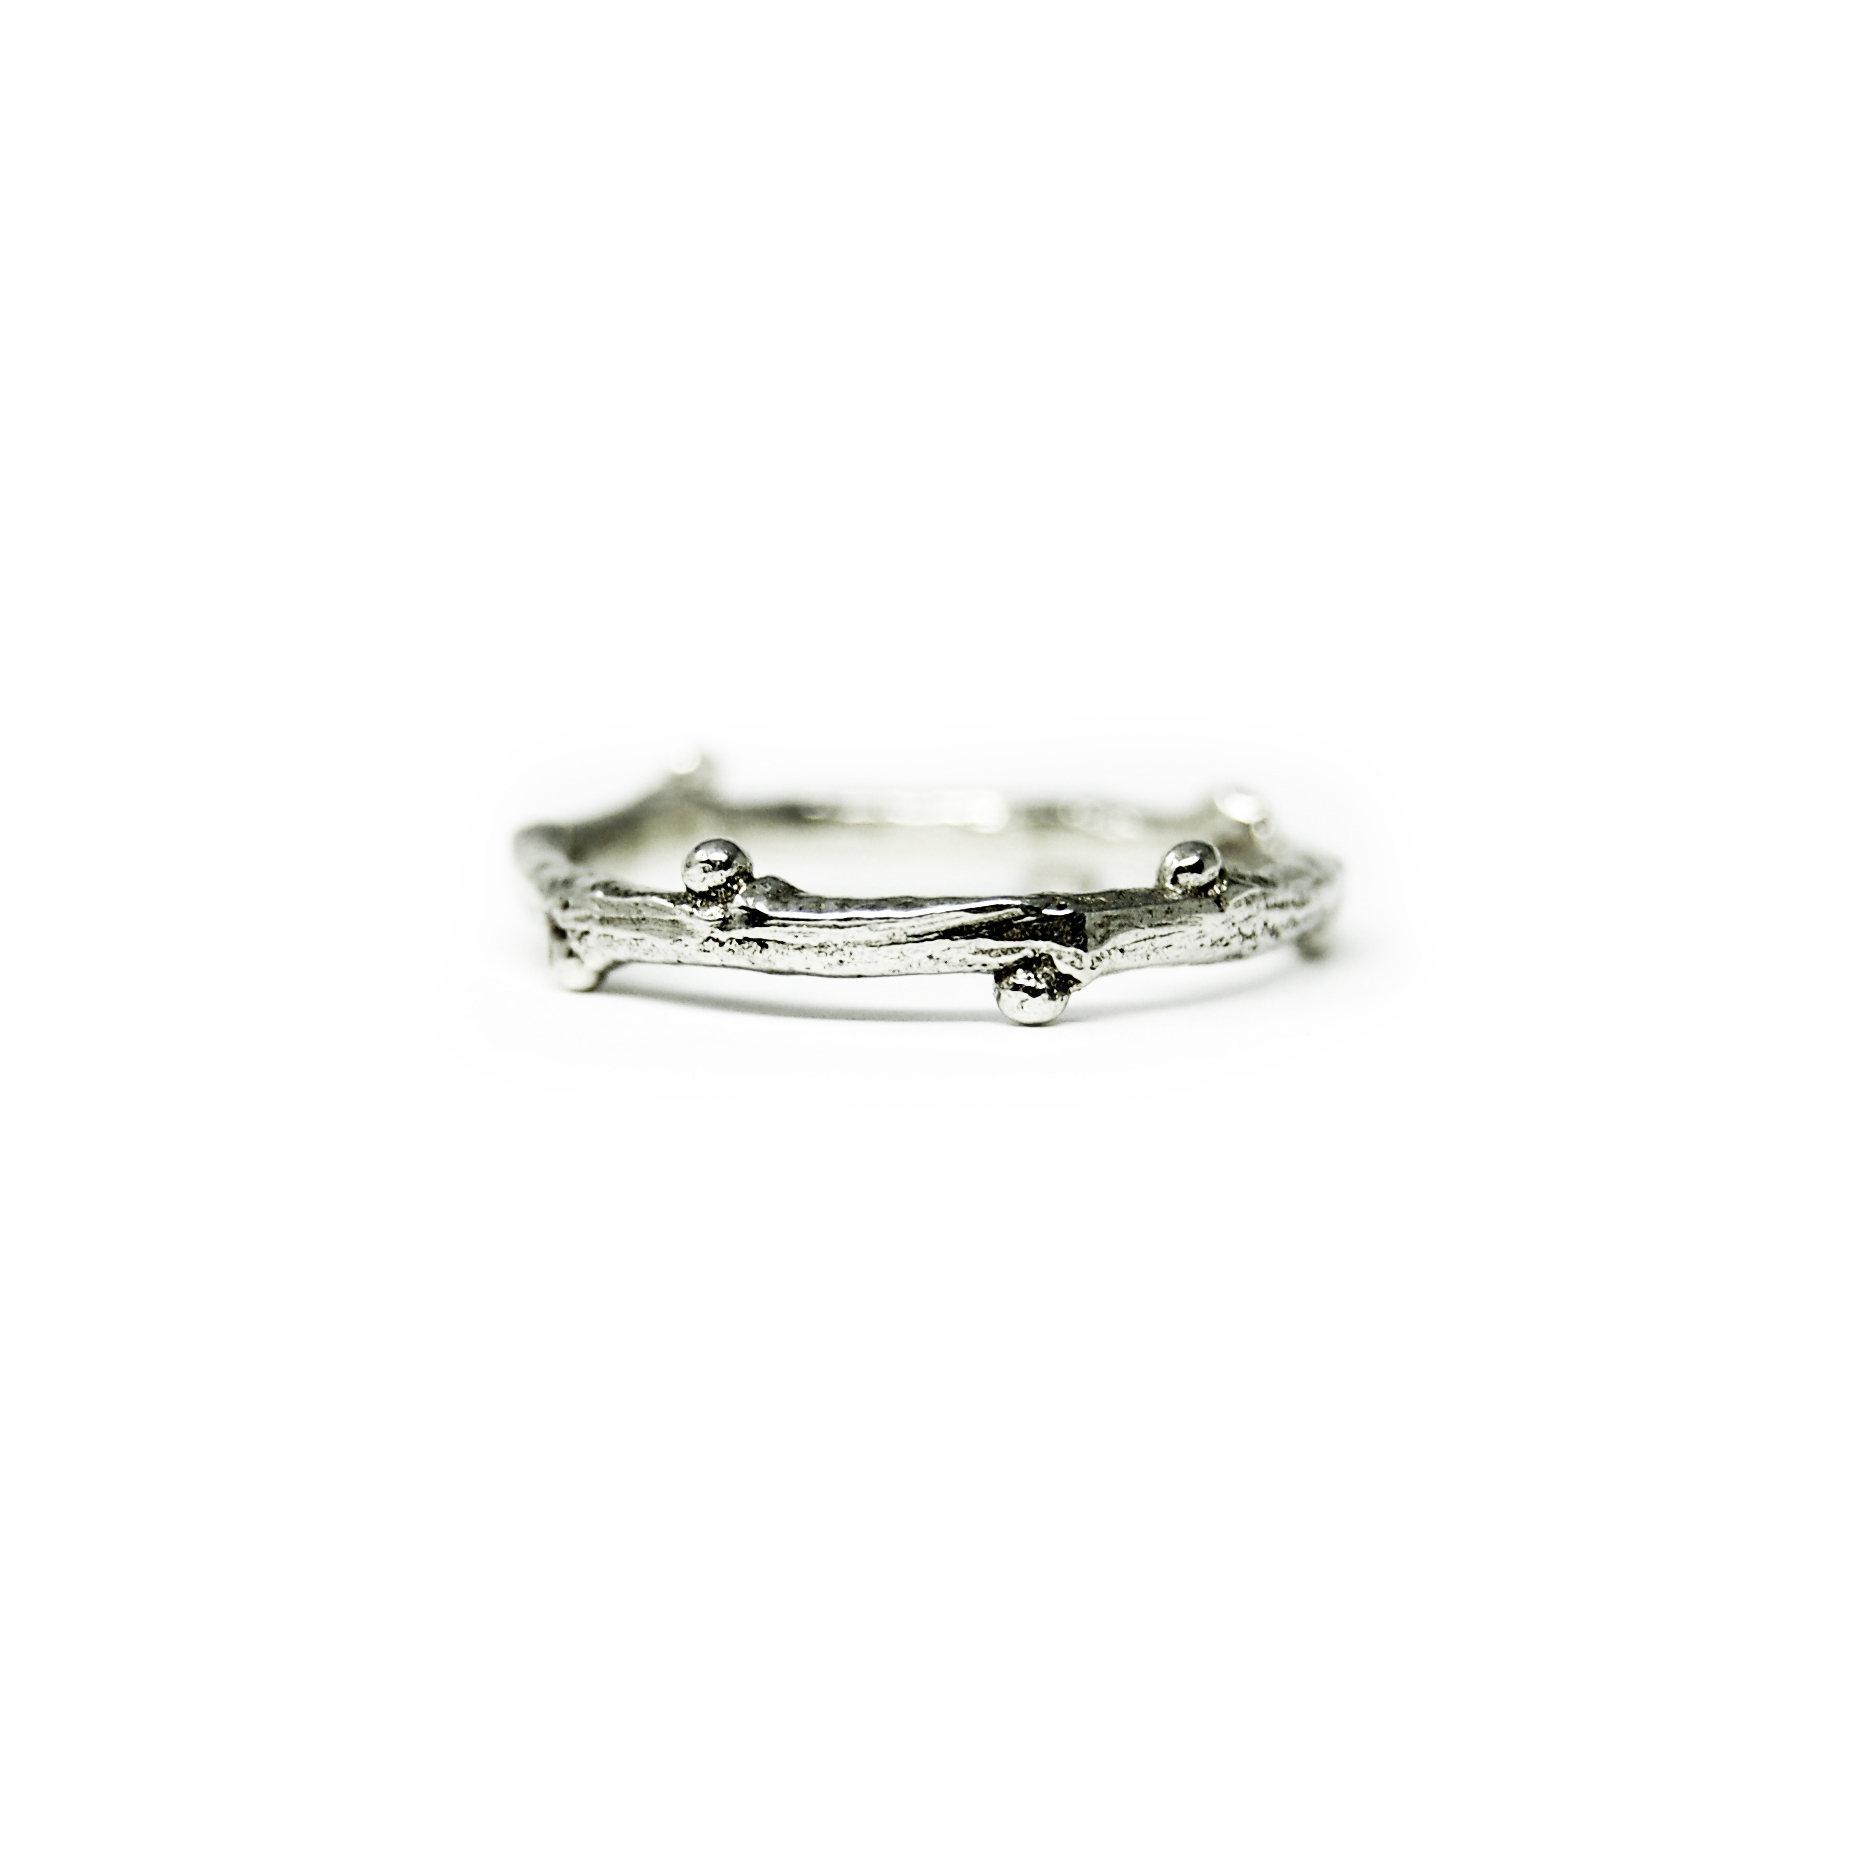 Twig Ring in Sterling Silver $48.00